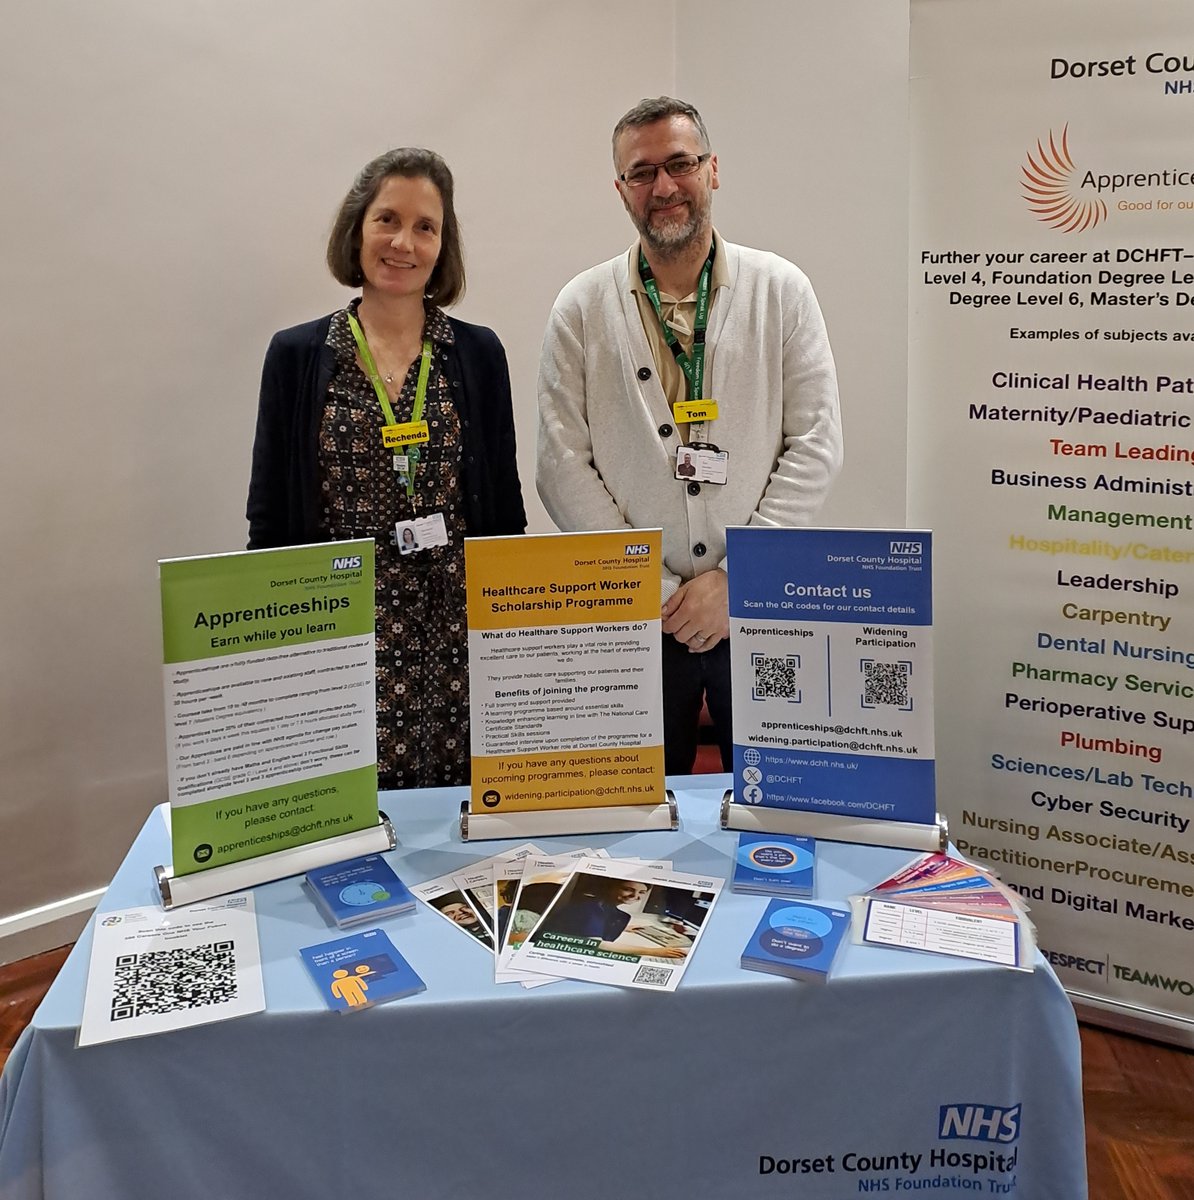 Tom and Rechenda from our Widening Participation and Apprenticeship teams are at Kingston Maurward College today for the Dorset Festival of Careers and Industry event, promoting NHS careers to local young people. @tweet_kmc @DorsetCouncilUK @DorsetCEC @thomashardye